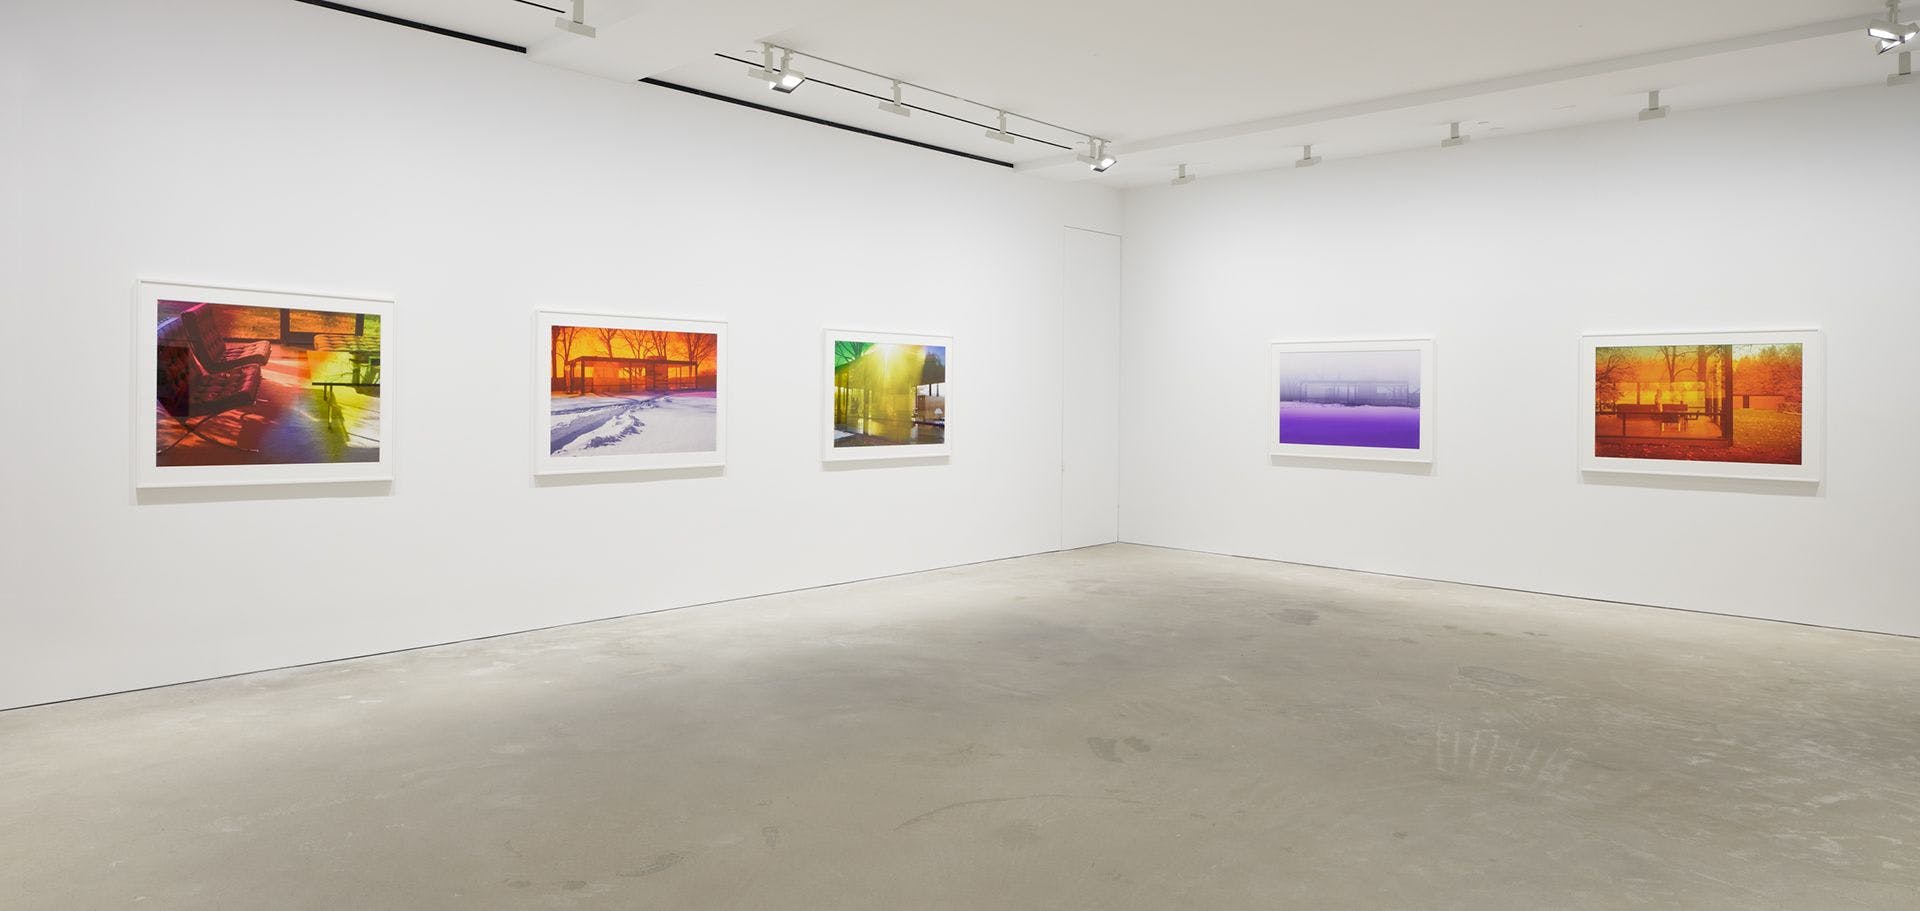 An installation view of an exhibition titled James Welling: Metamorphosis at David Zwirner, Hong Kong, in 2021.